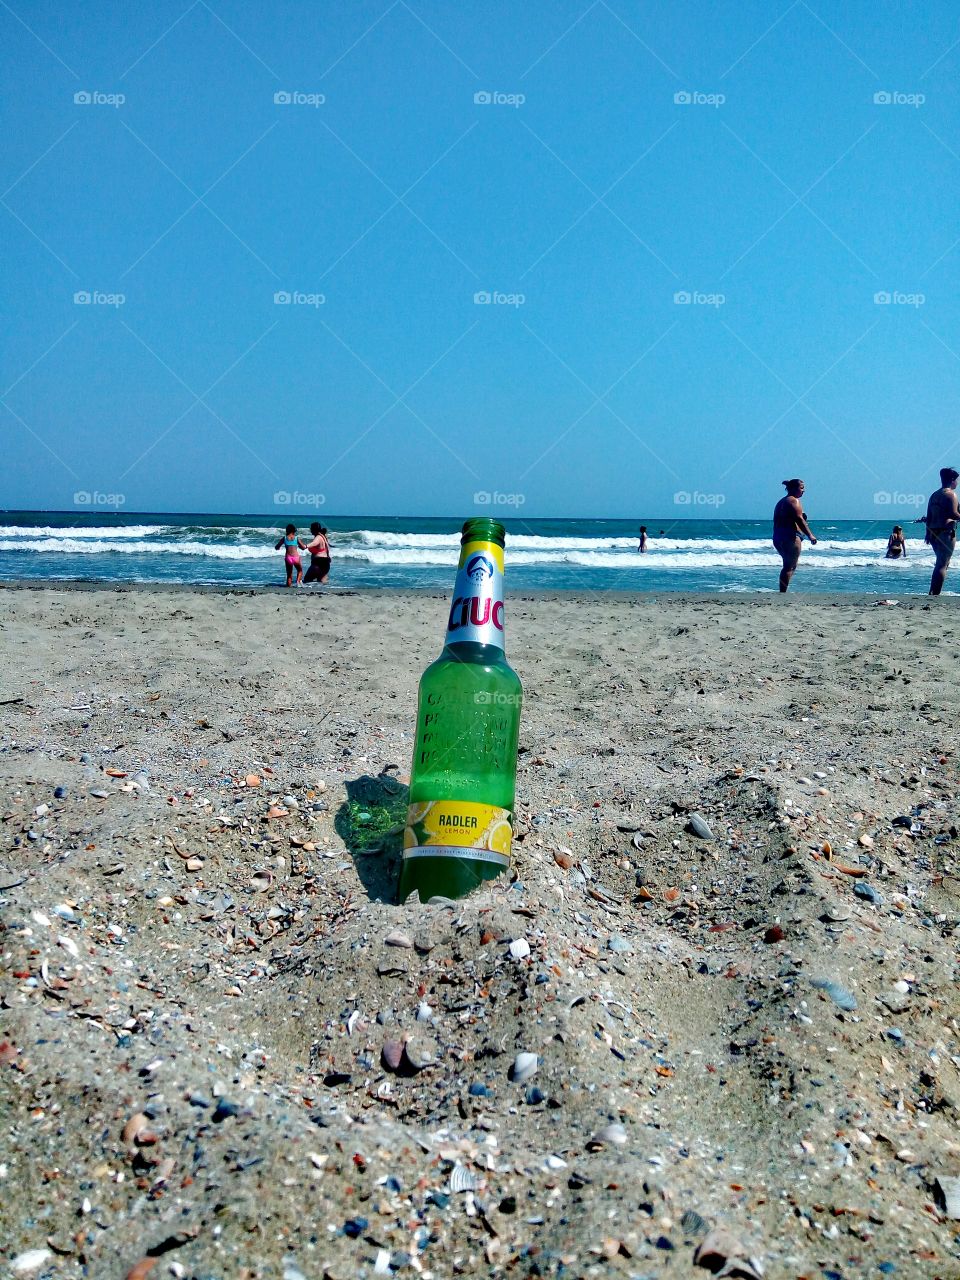 Summer hot, the best is cold beer